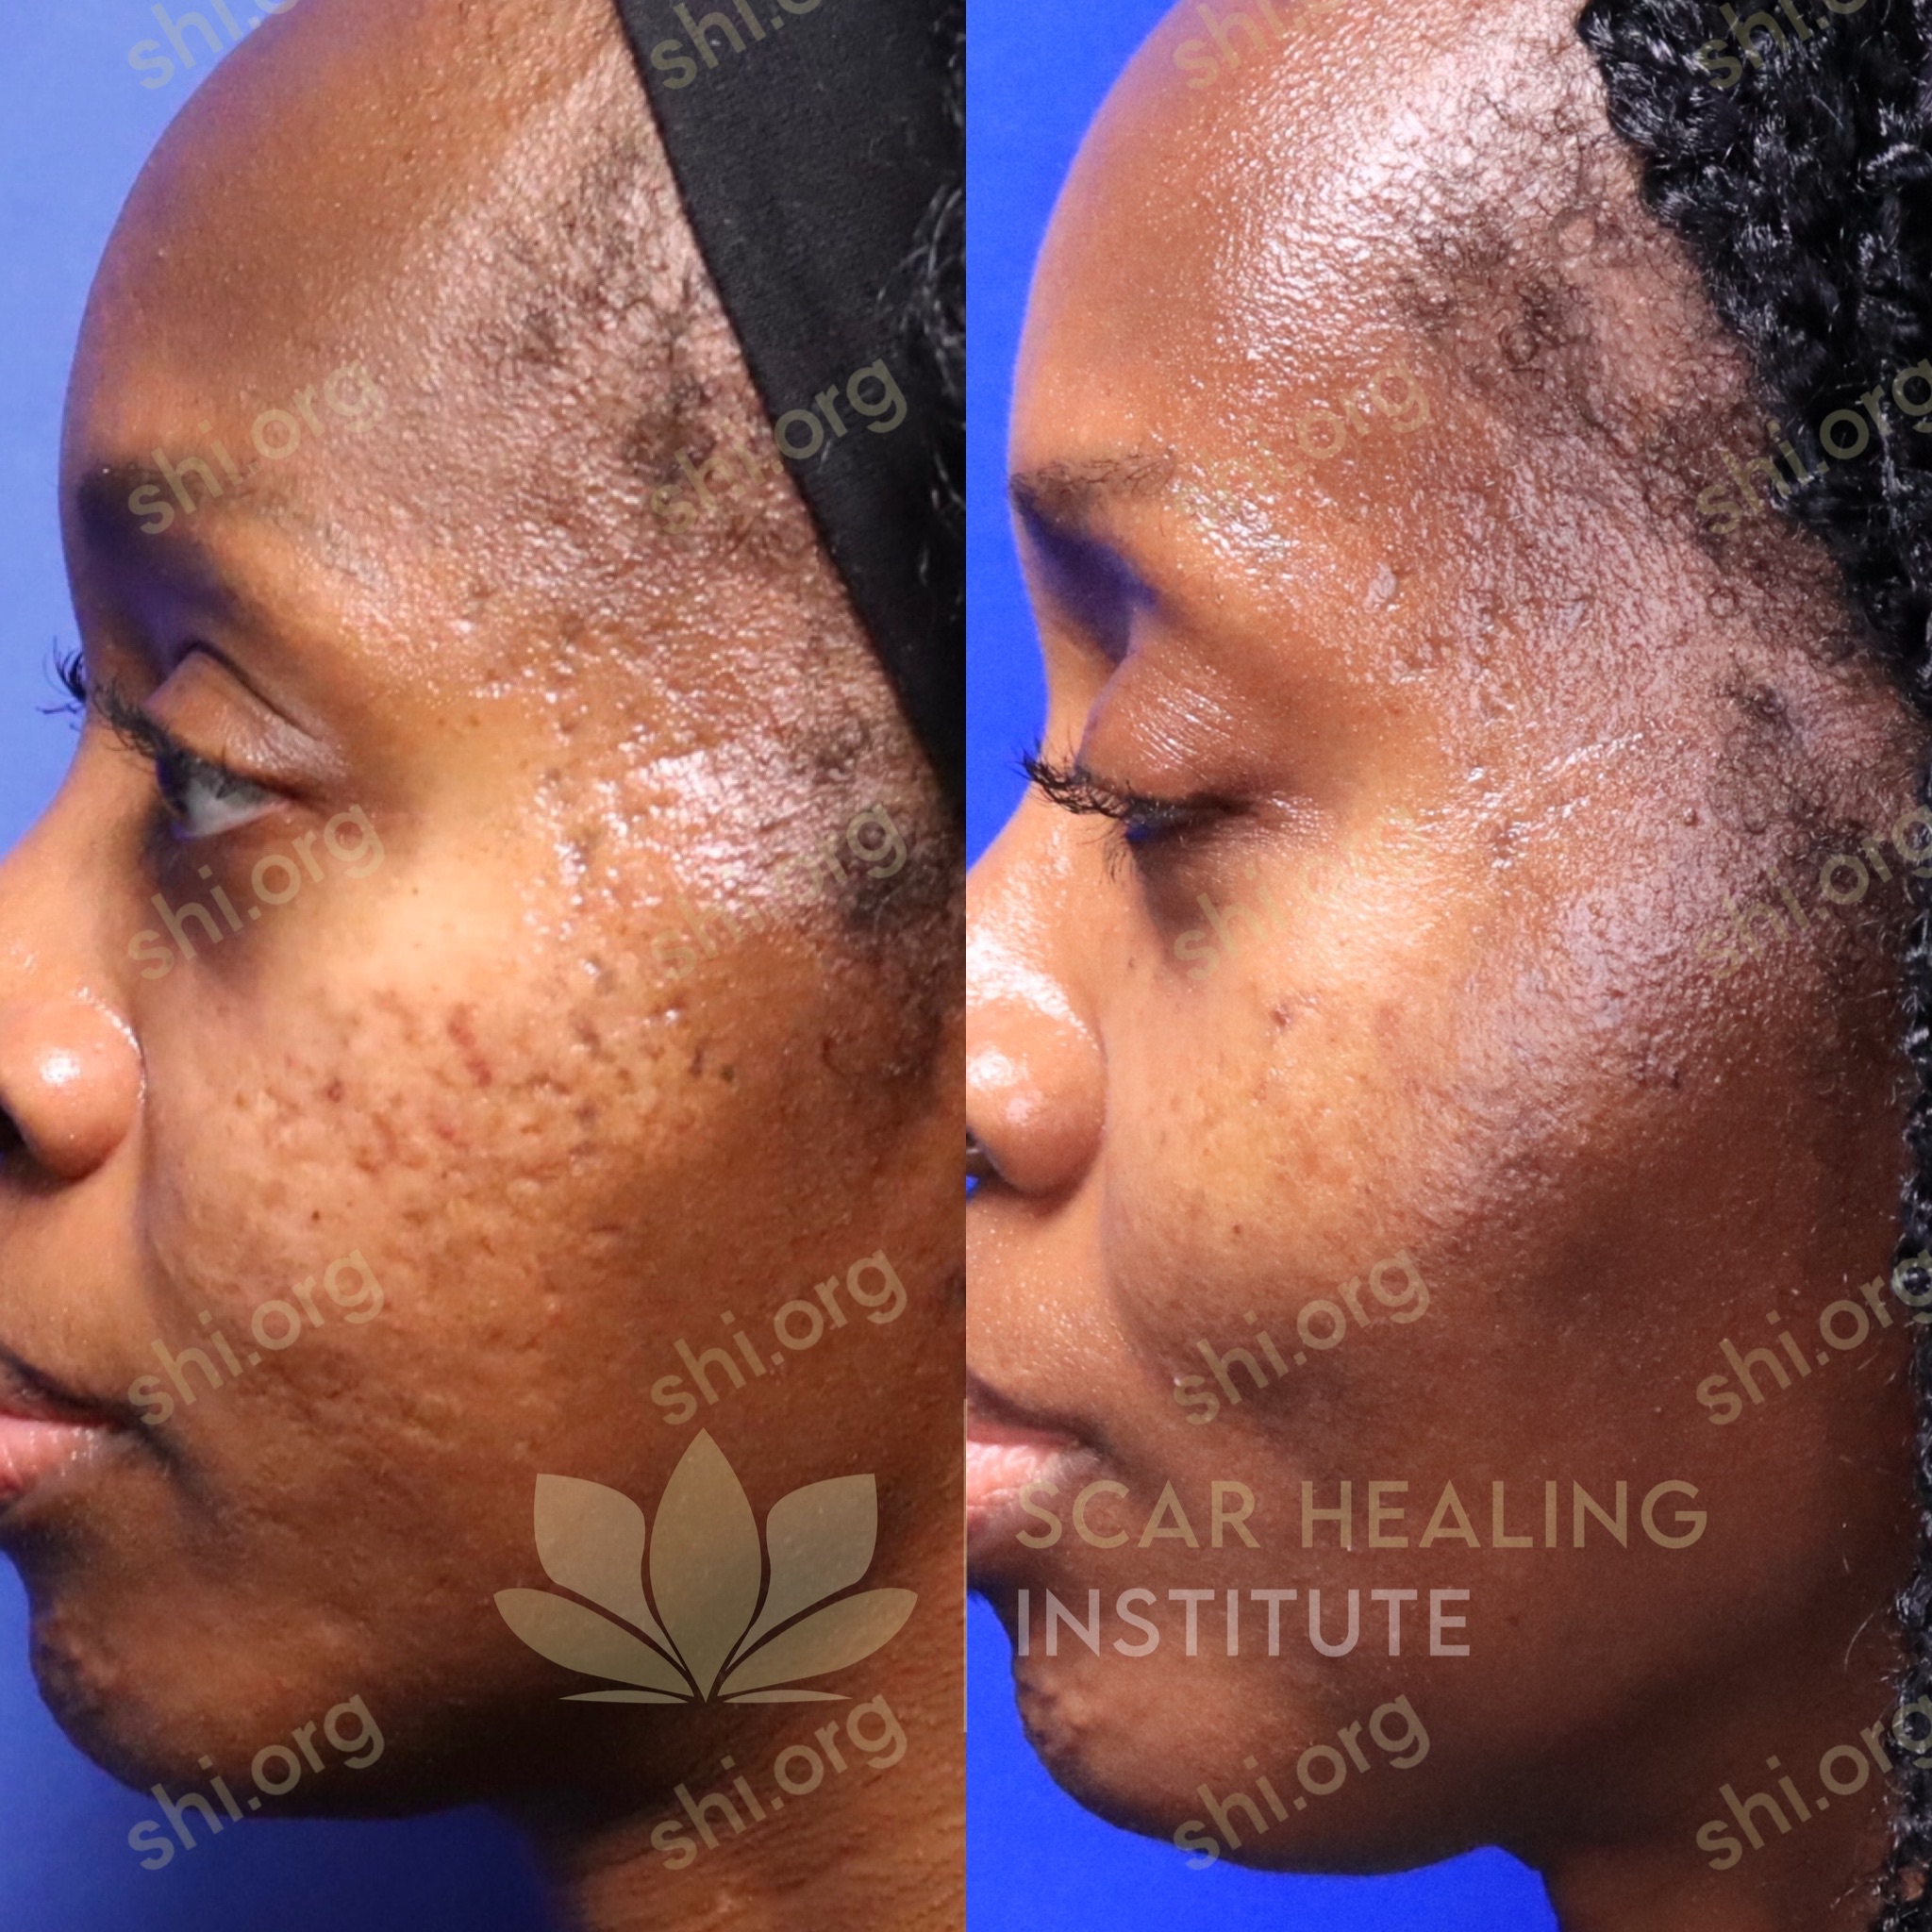 LJ SHI 29 - Acne Scarring Active Acne Patient Results Scar Healing